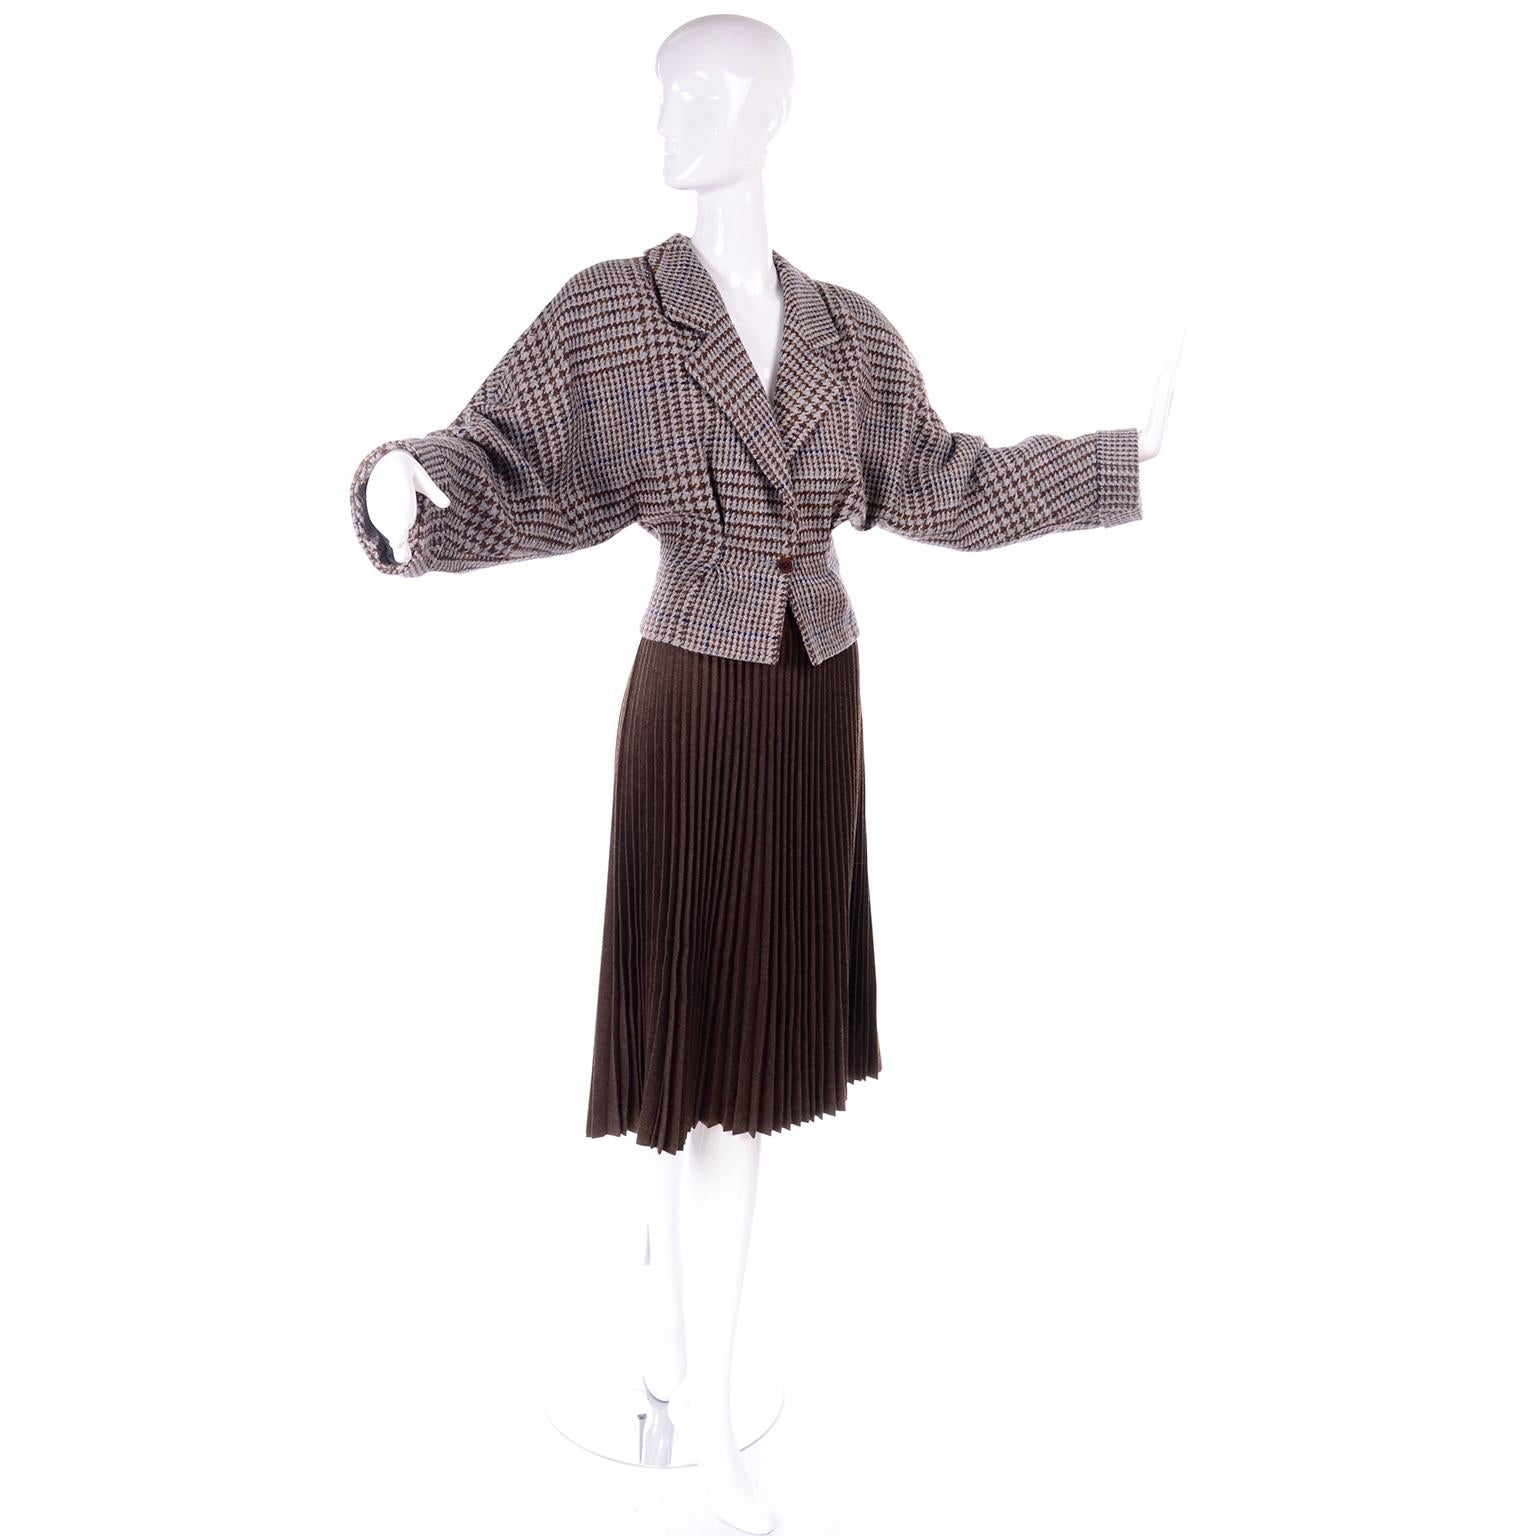 This gorgeous two piece suit was made by Giorgio Armani in the 1980's. The jacket is cropped with oversized dolman sleeves and fitted waist with a gathered pleat on either side. The fabric is in a houndstooth plaid pattern in grey, blue and brown.